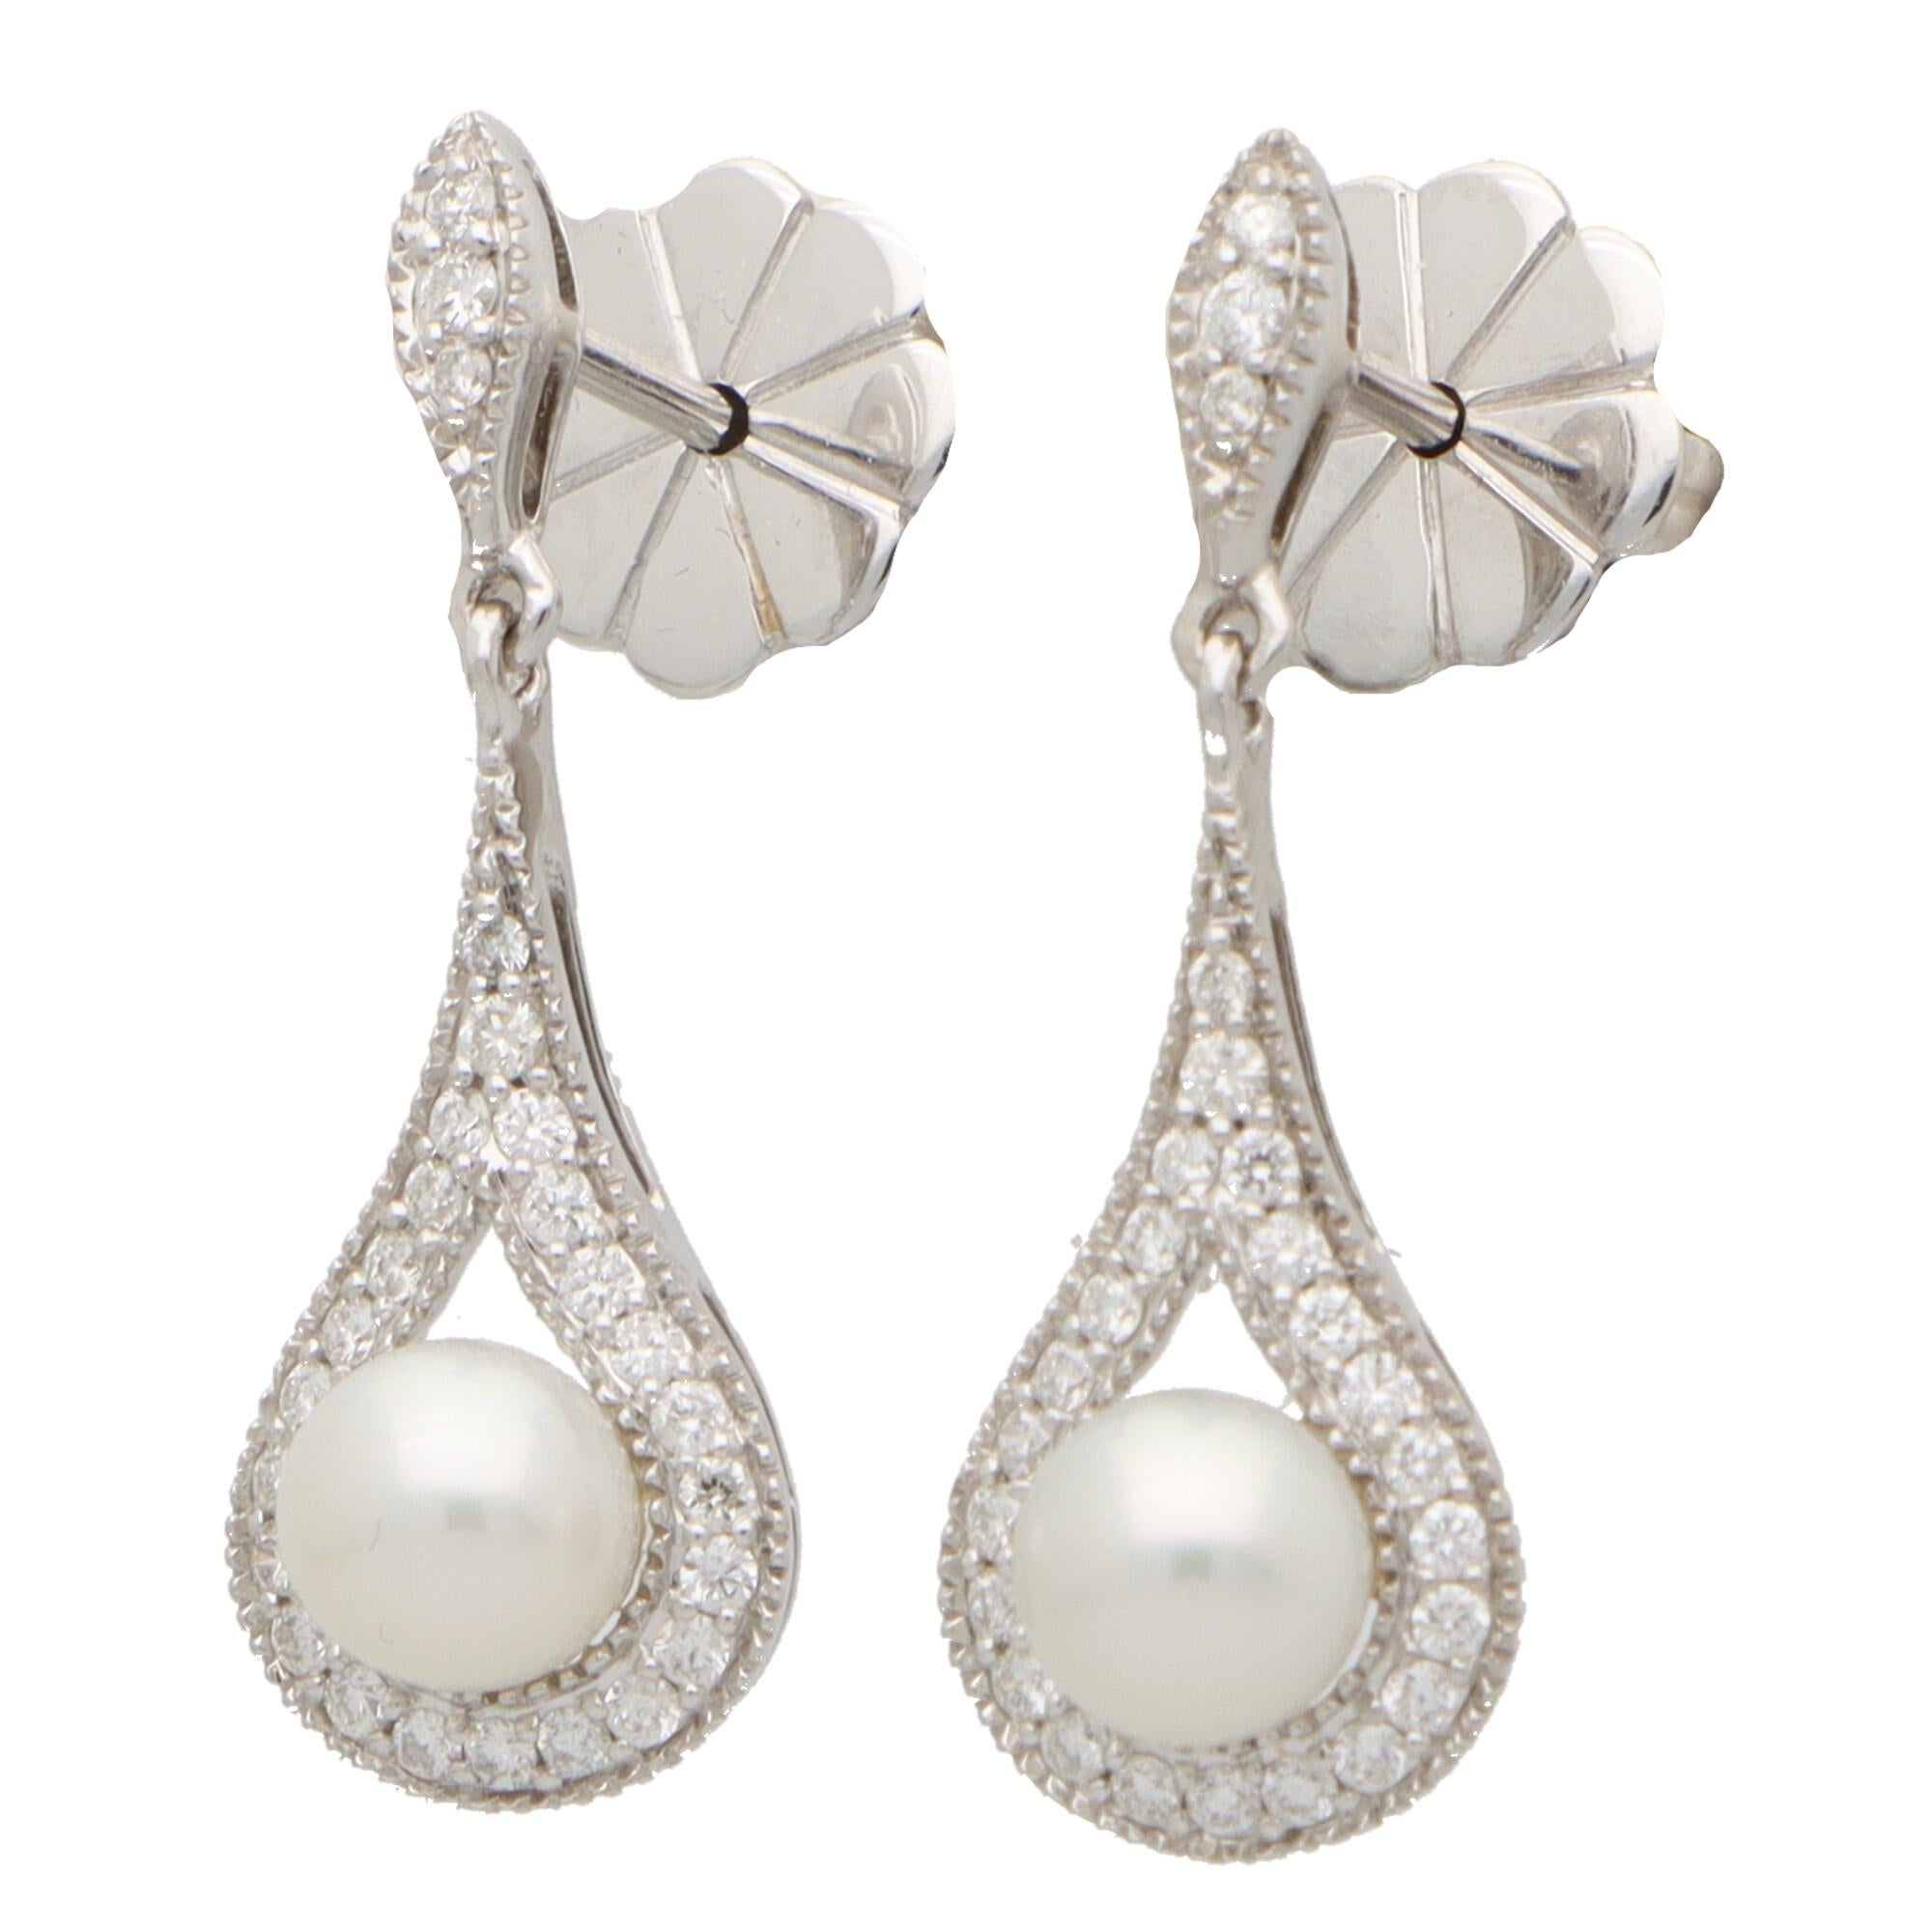 Round Cut Contemporary Diamond and Pearl Drop Earrings Set in 18k White Gold